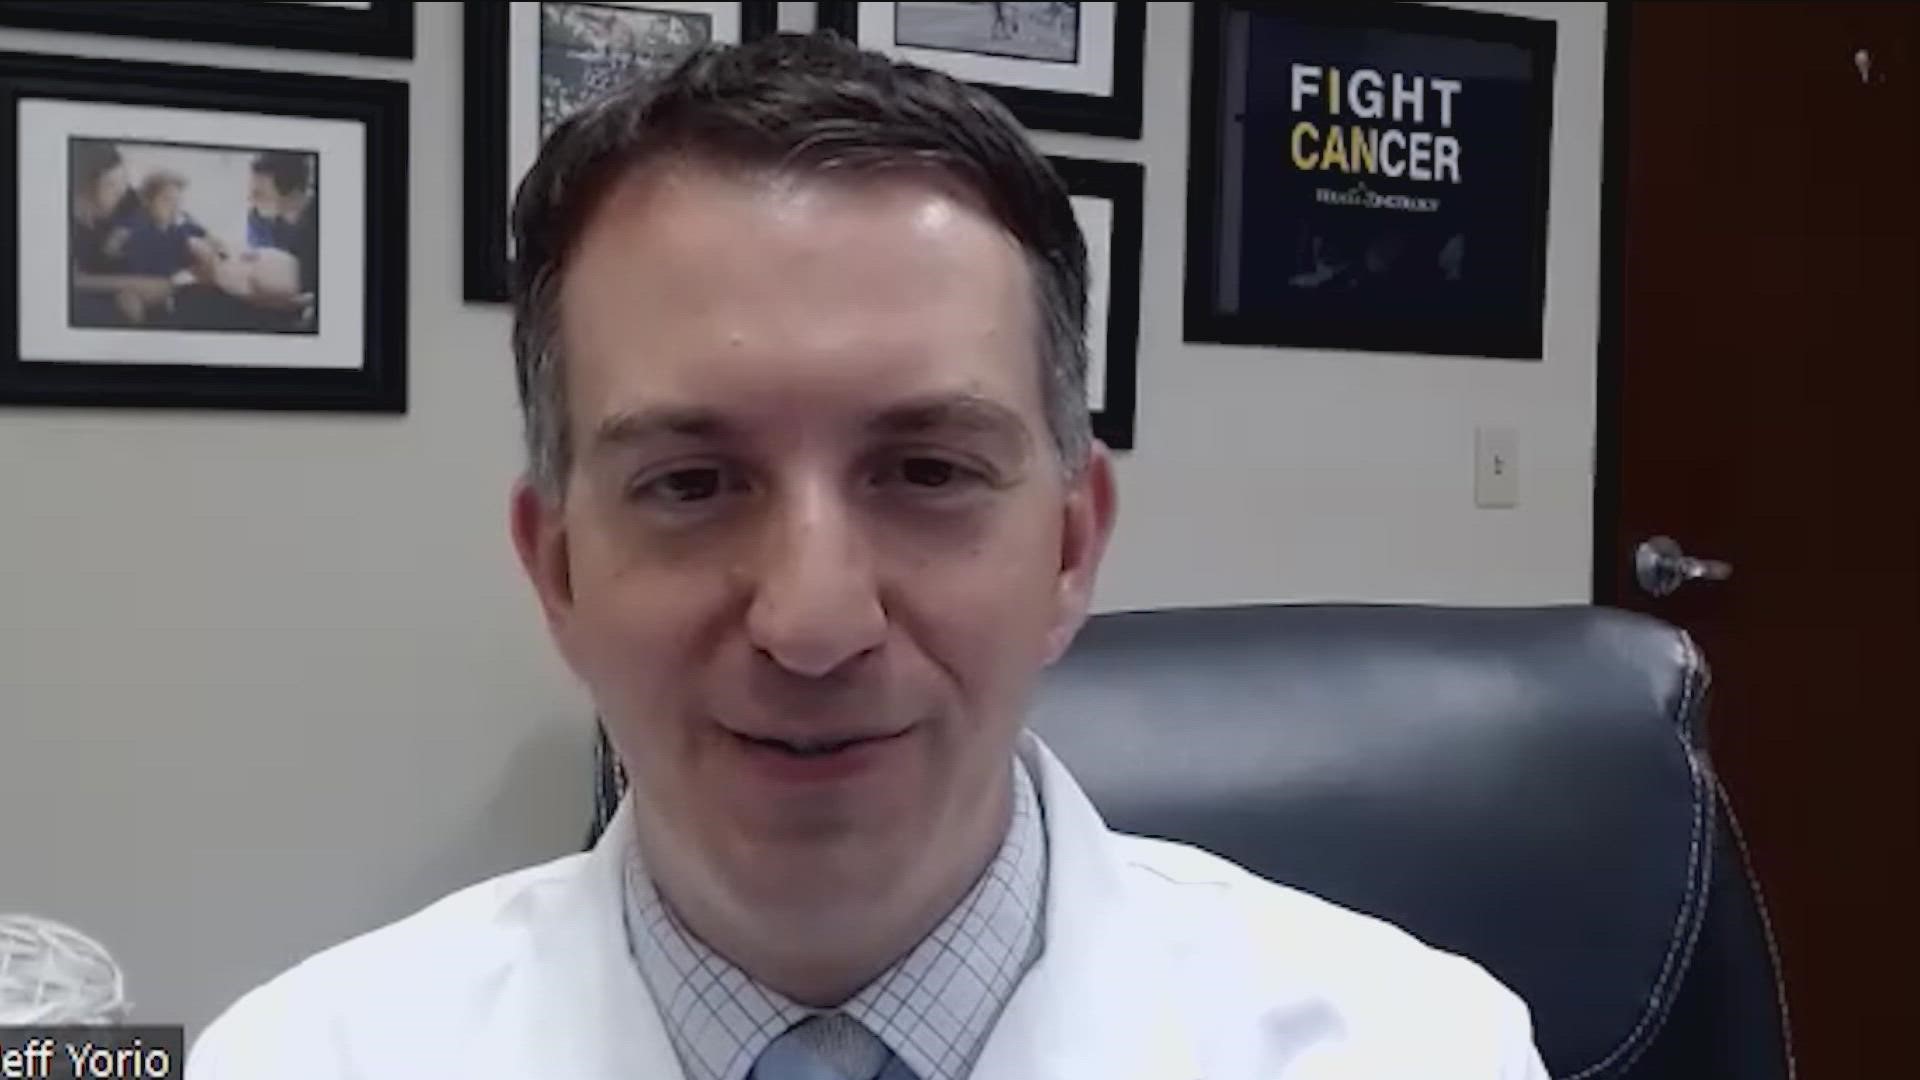 Texas Oncology's Dr. Jeff Yorio said Texas ranks third in the nation for melanoma, the deadliest form of skin cancer.